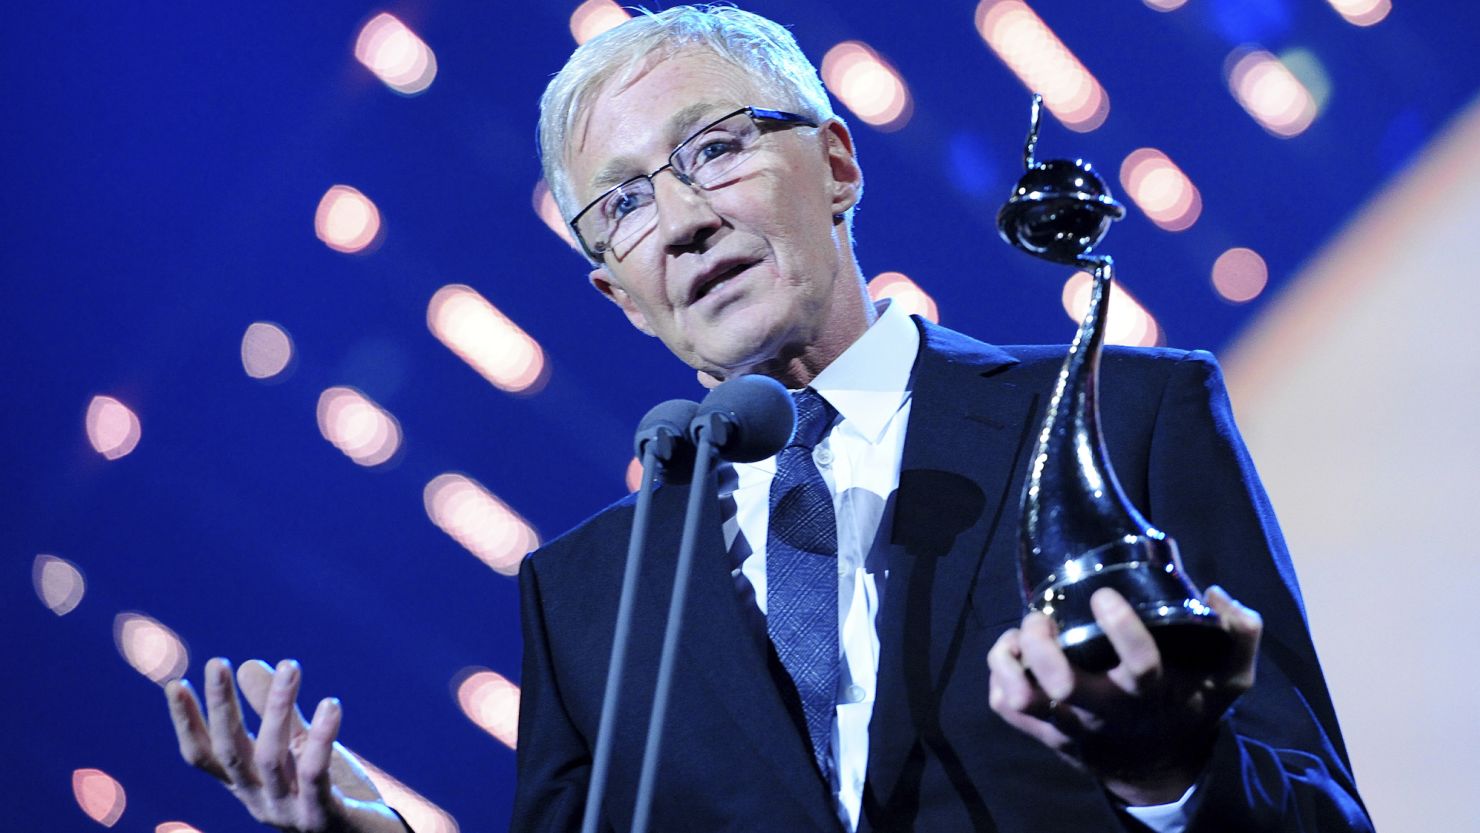 Paul O'Grady died "unexpectedly but peacefully" on March 28, his husband said.